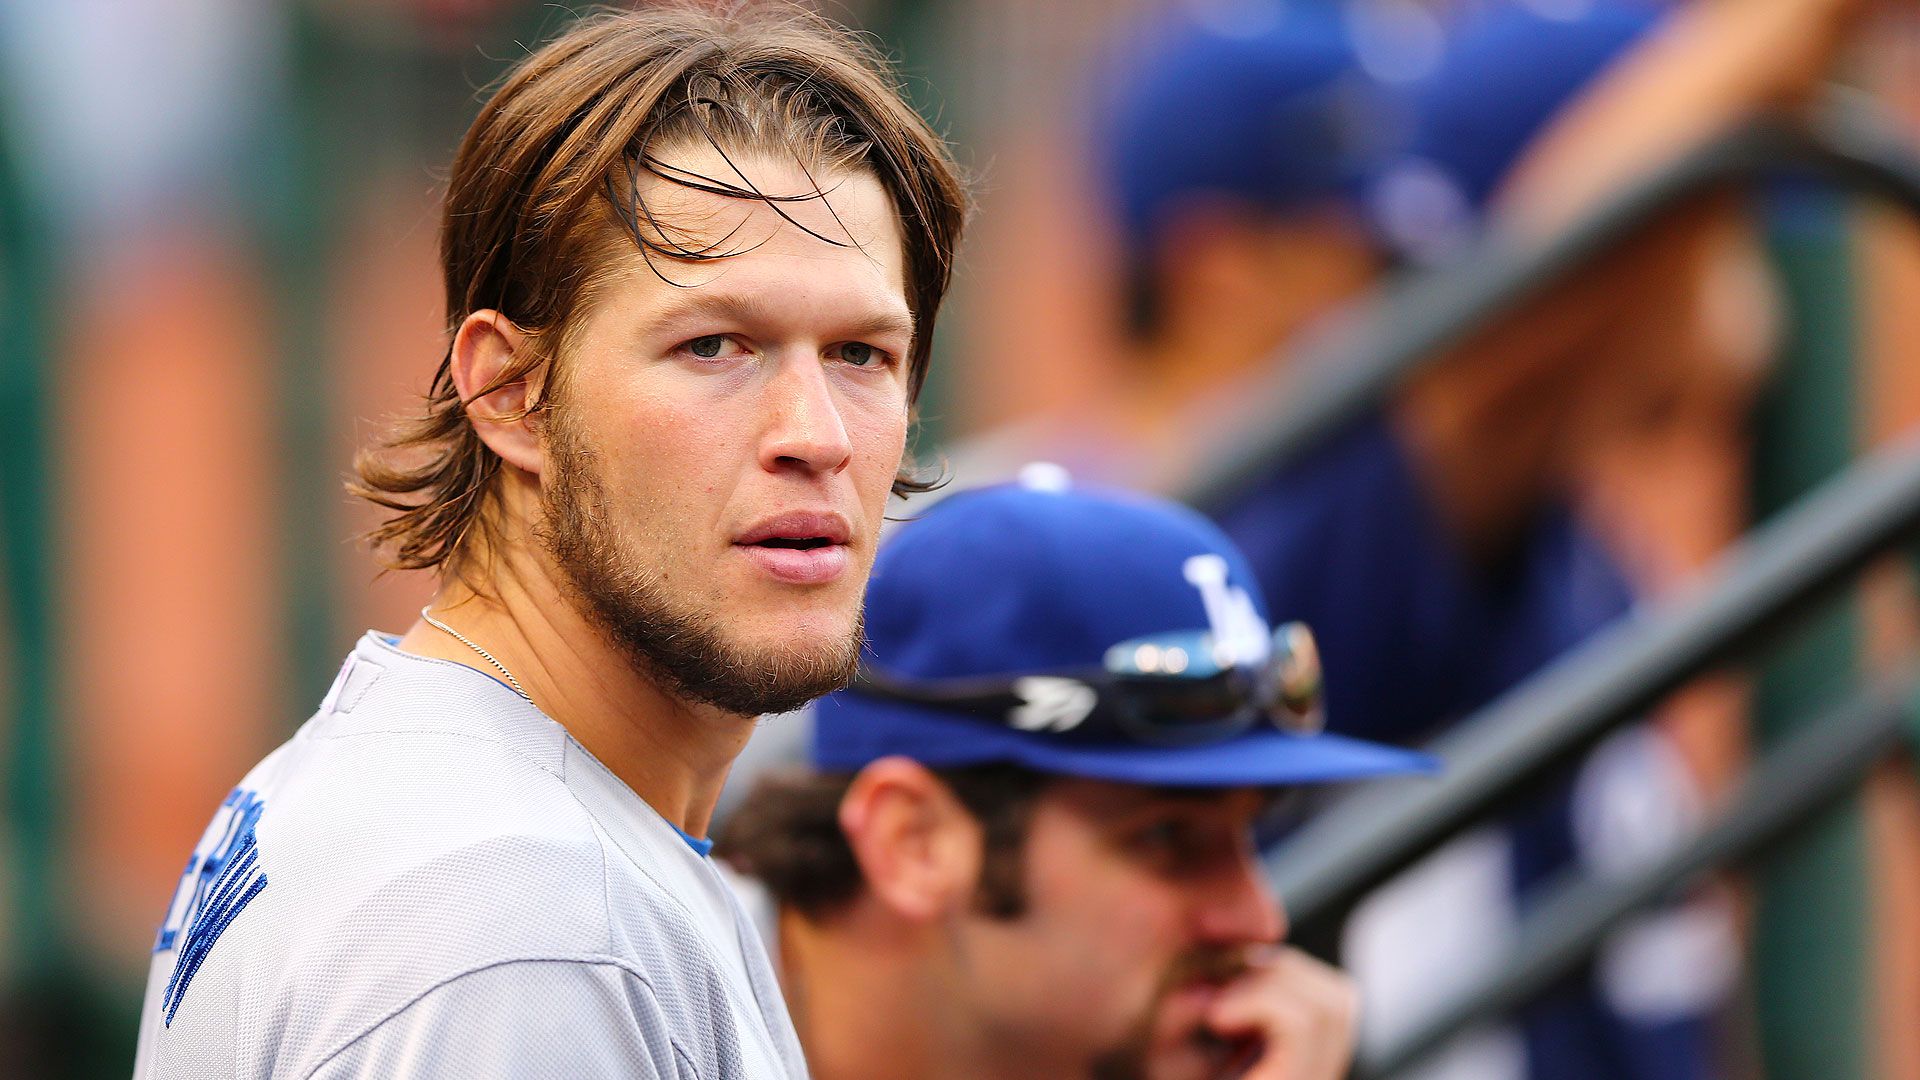 Dodgers make Clayton Kershaw baseball's richest pitcher with new deal